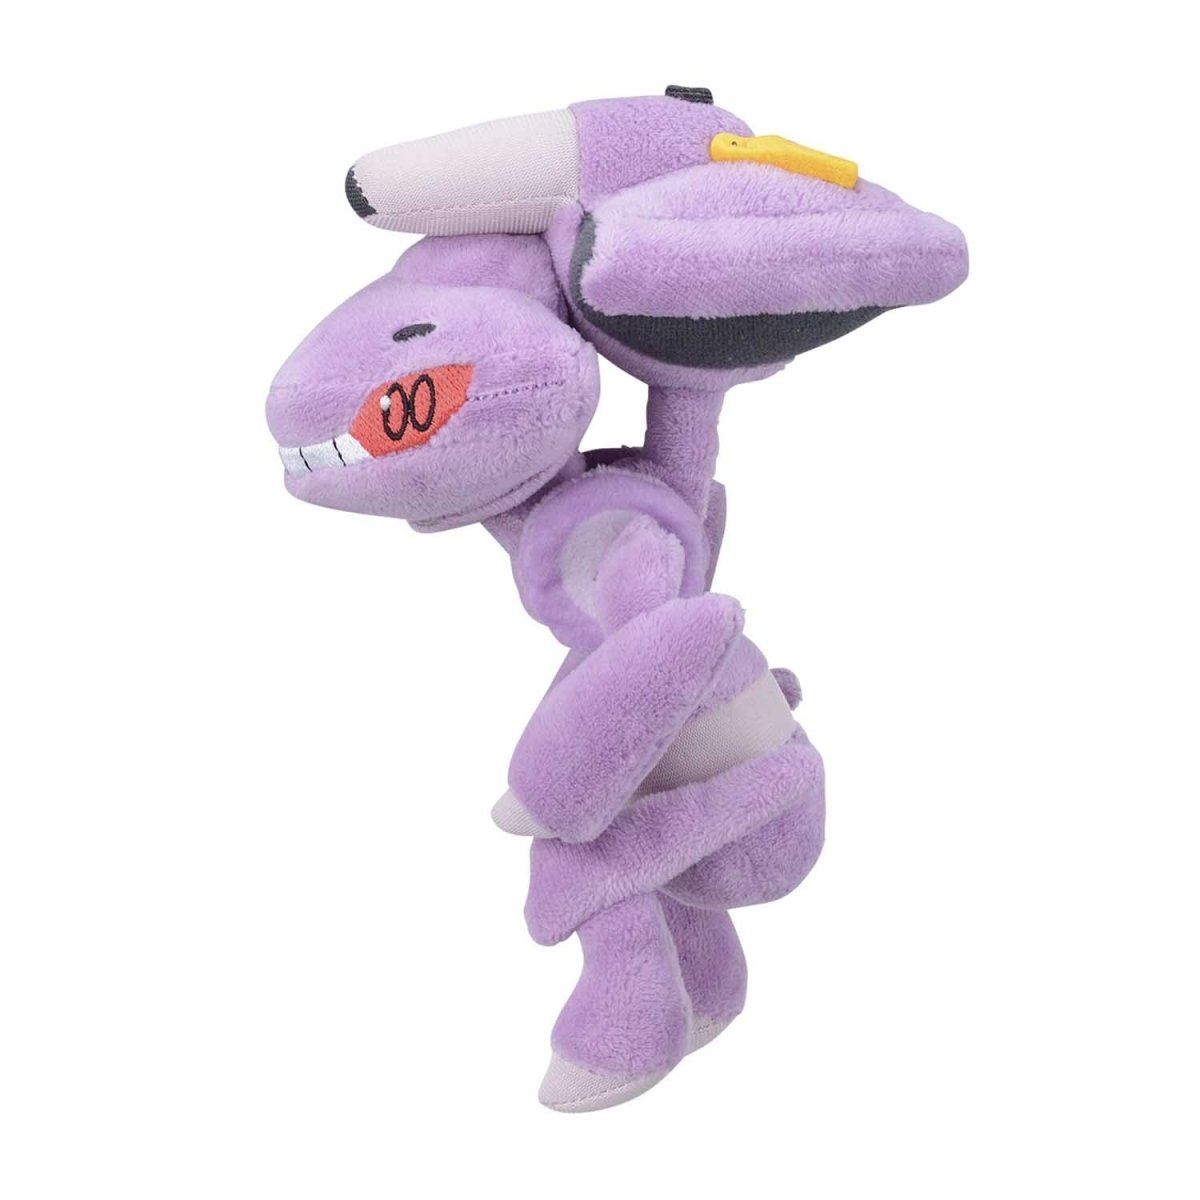 Pokemon GO: Shock Drive Genesect Has Arrived!